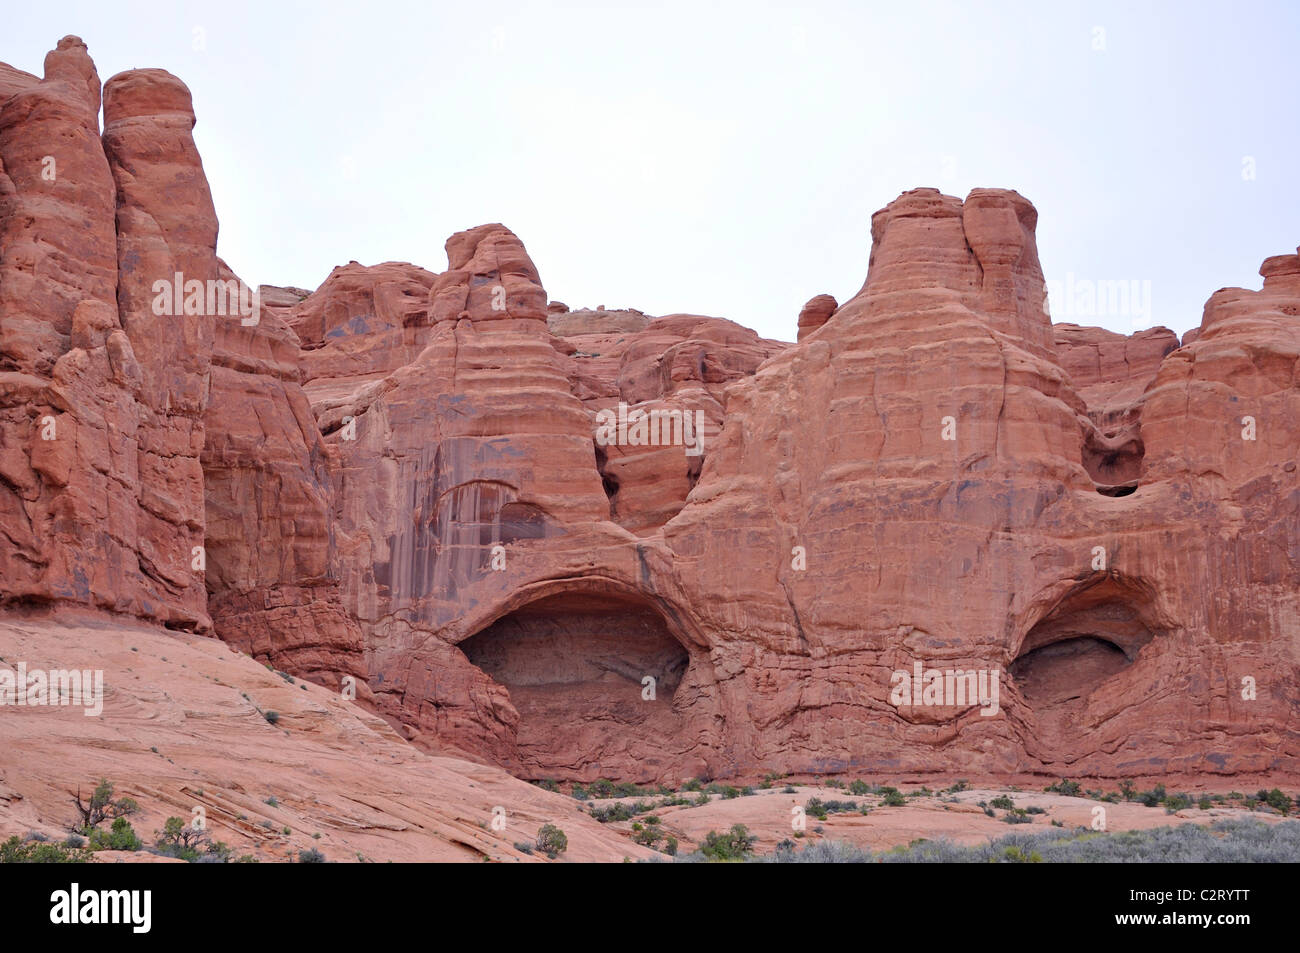 Arch being formed, Arches National Park, Utah, USA Stock Photo